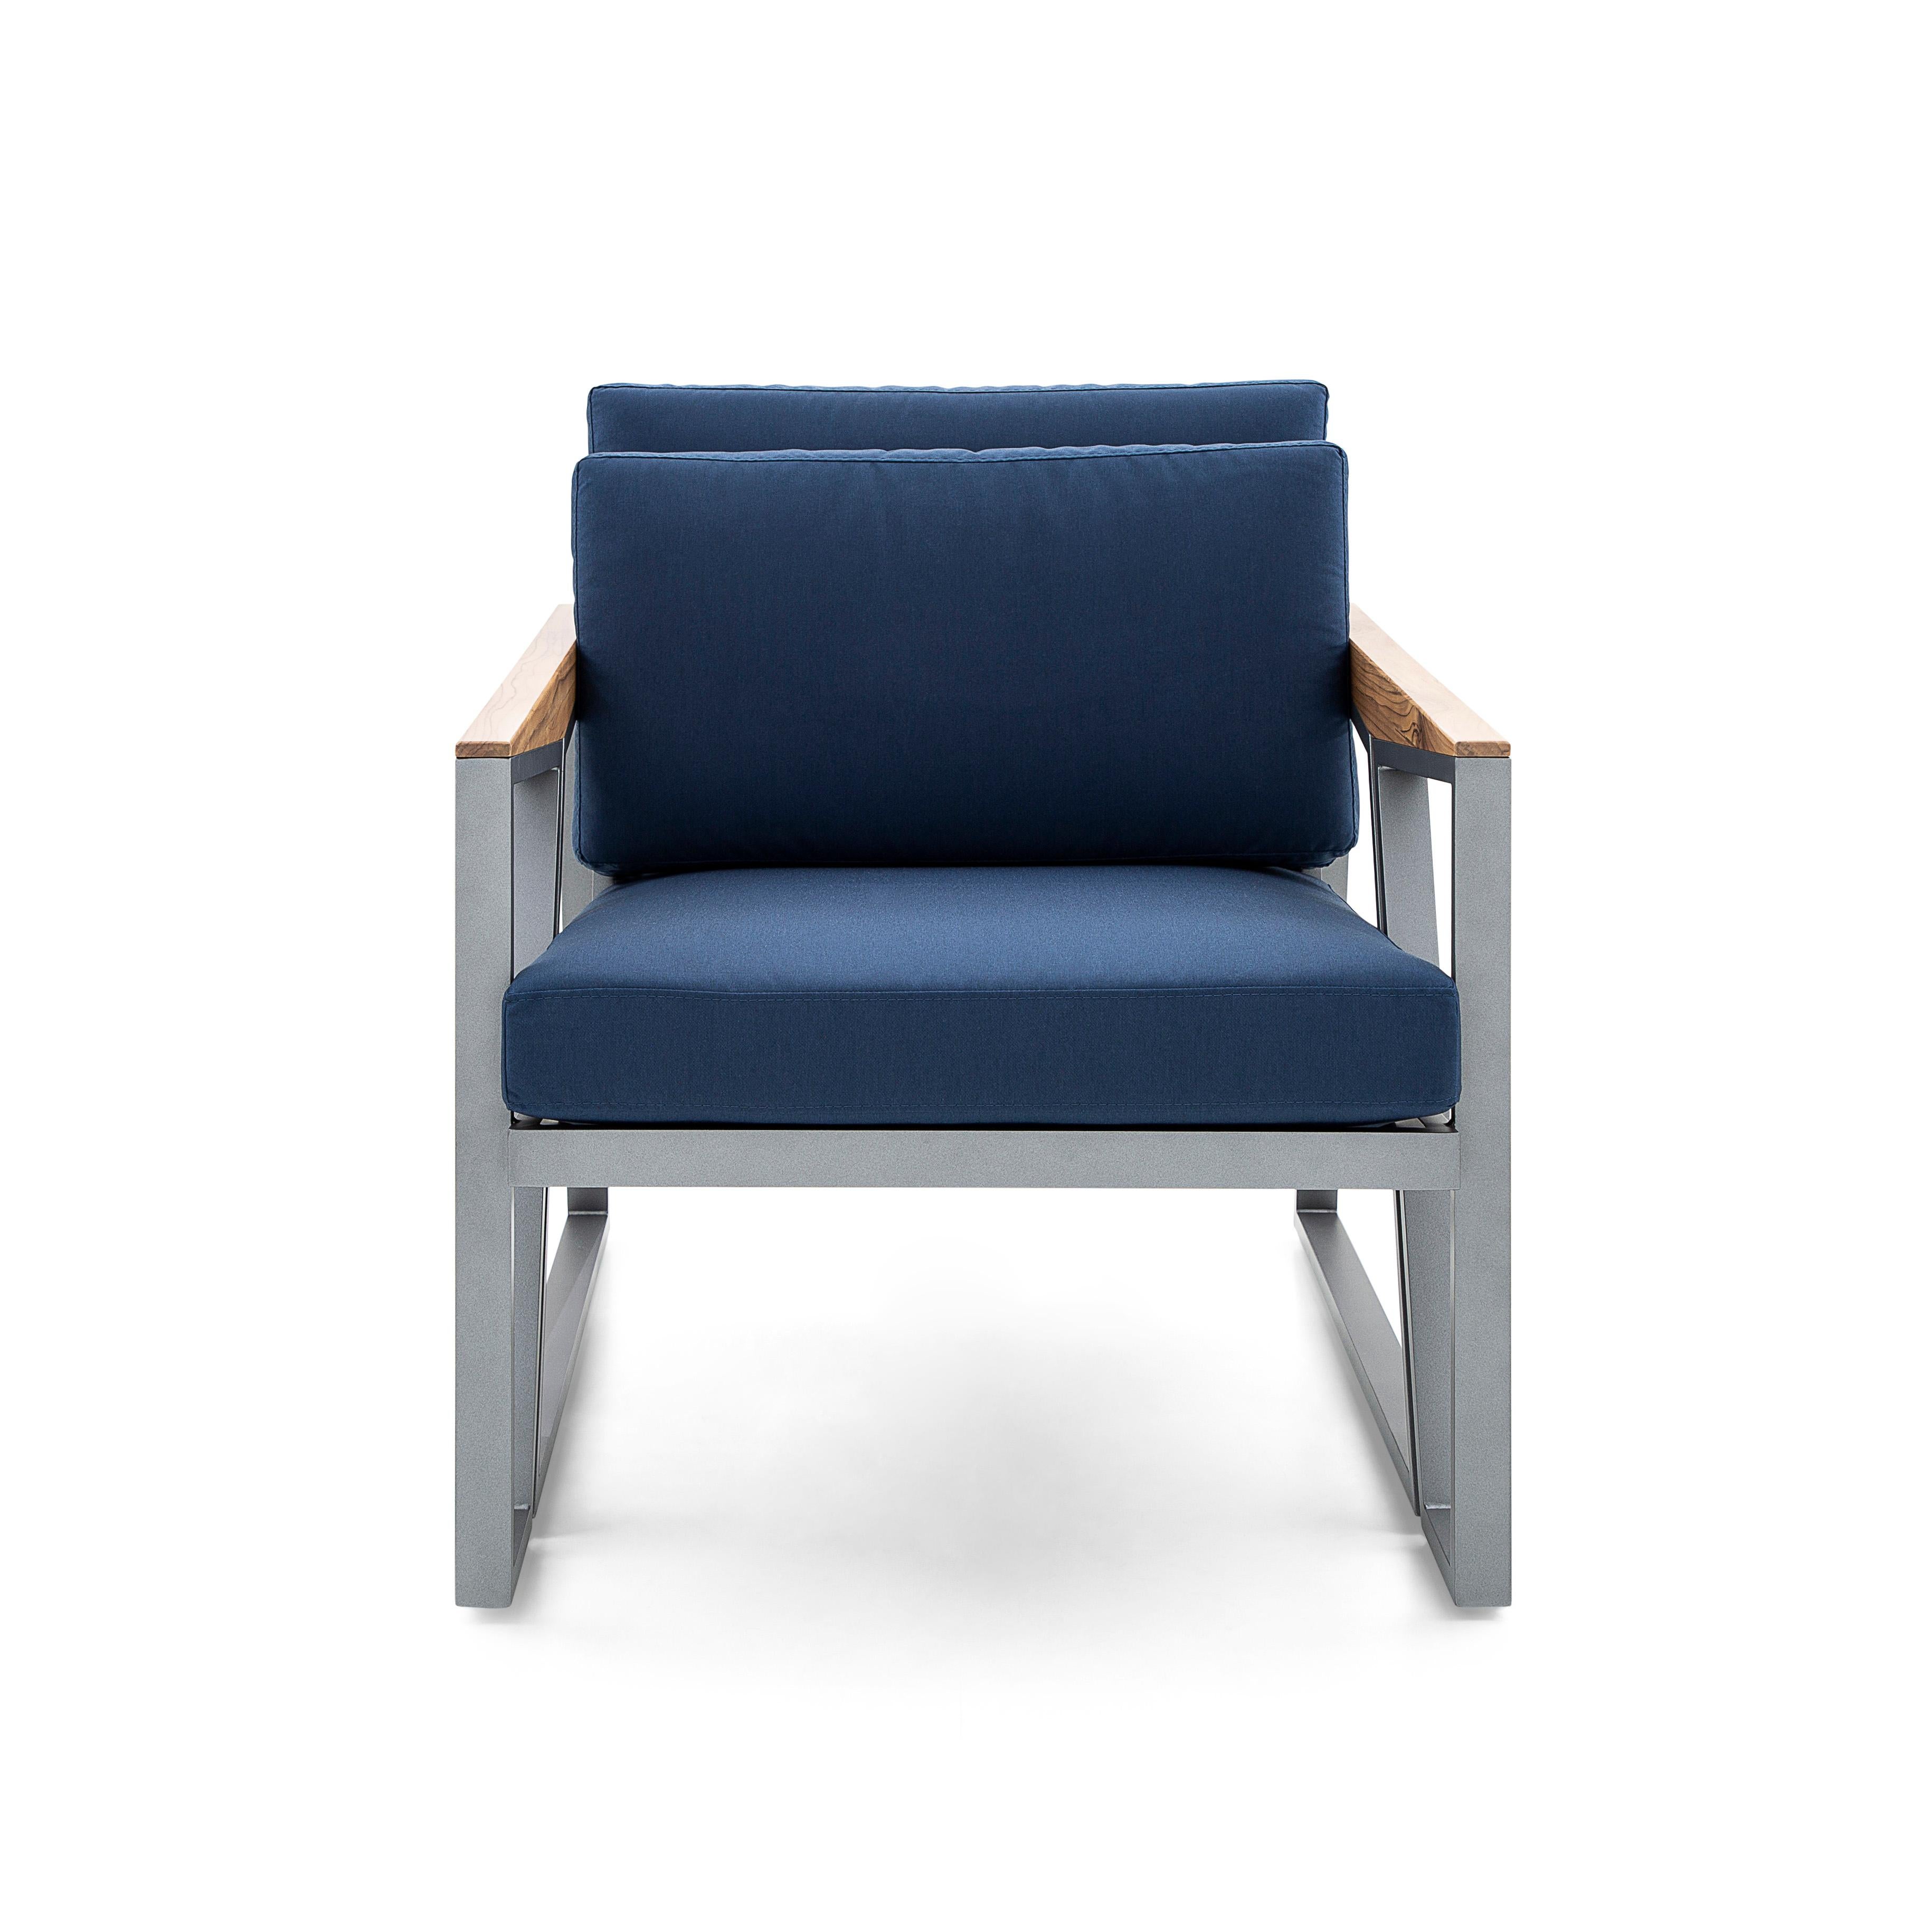 The Scalene armchair was created by our amazing Uultis Design team, with an upholstered beautiful dark blue fabric, features a welded aluminum structure that gives this chair more resistance and avoids creaking and flaws in the structure, and with